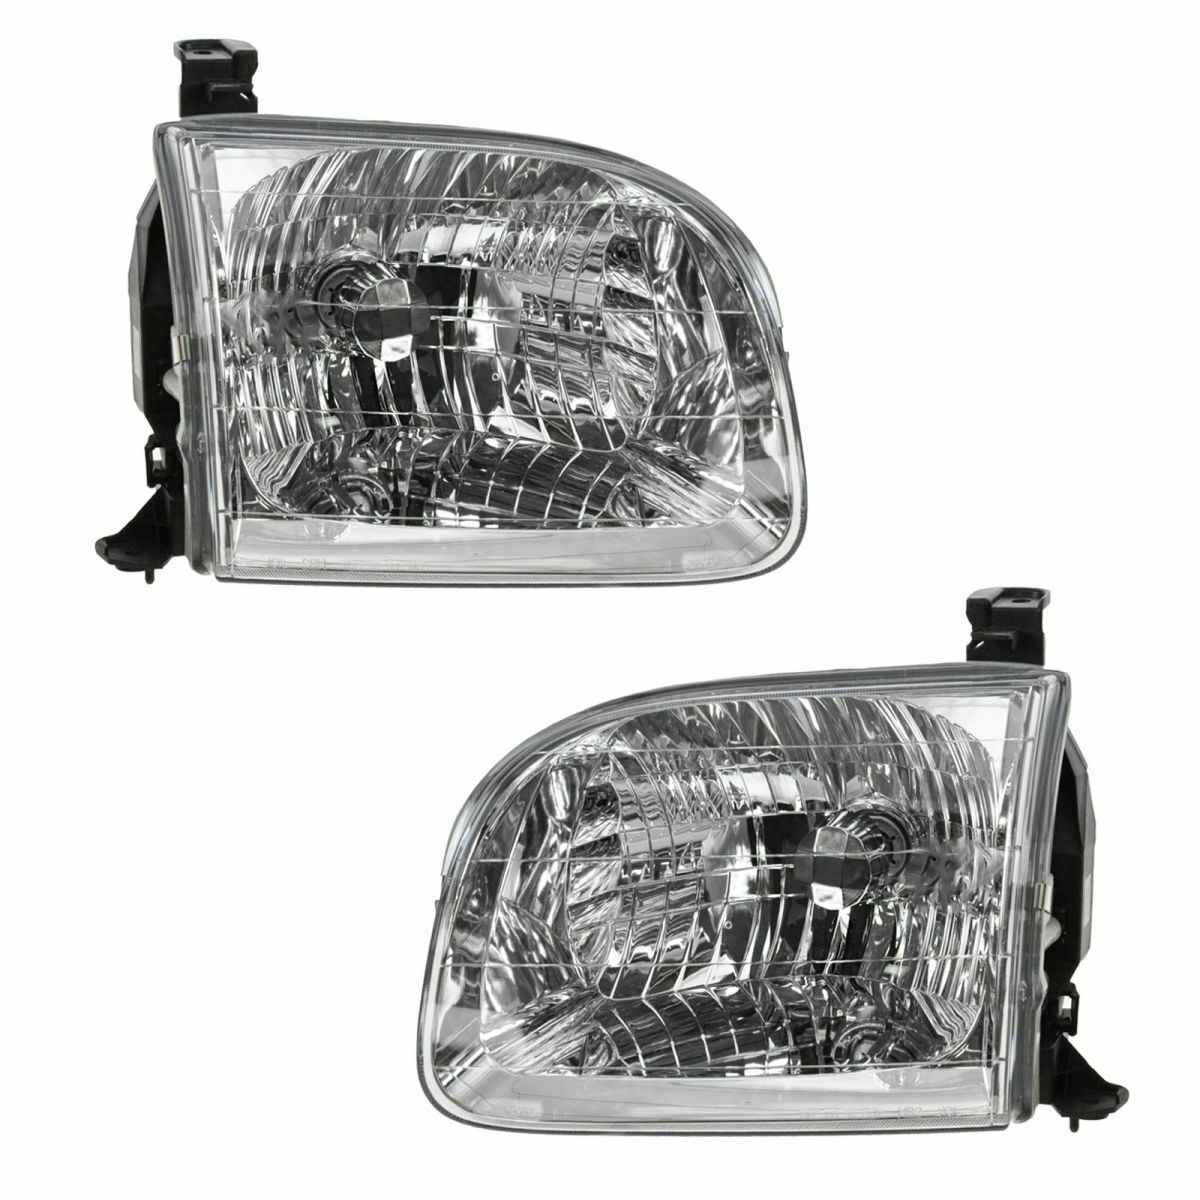 Headlights Headlamps Left & Right Pair Set for Toyota Sequoia Tundra Truck